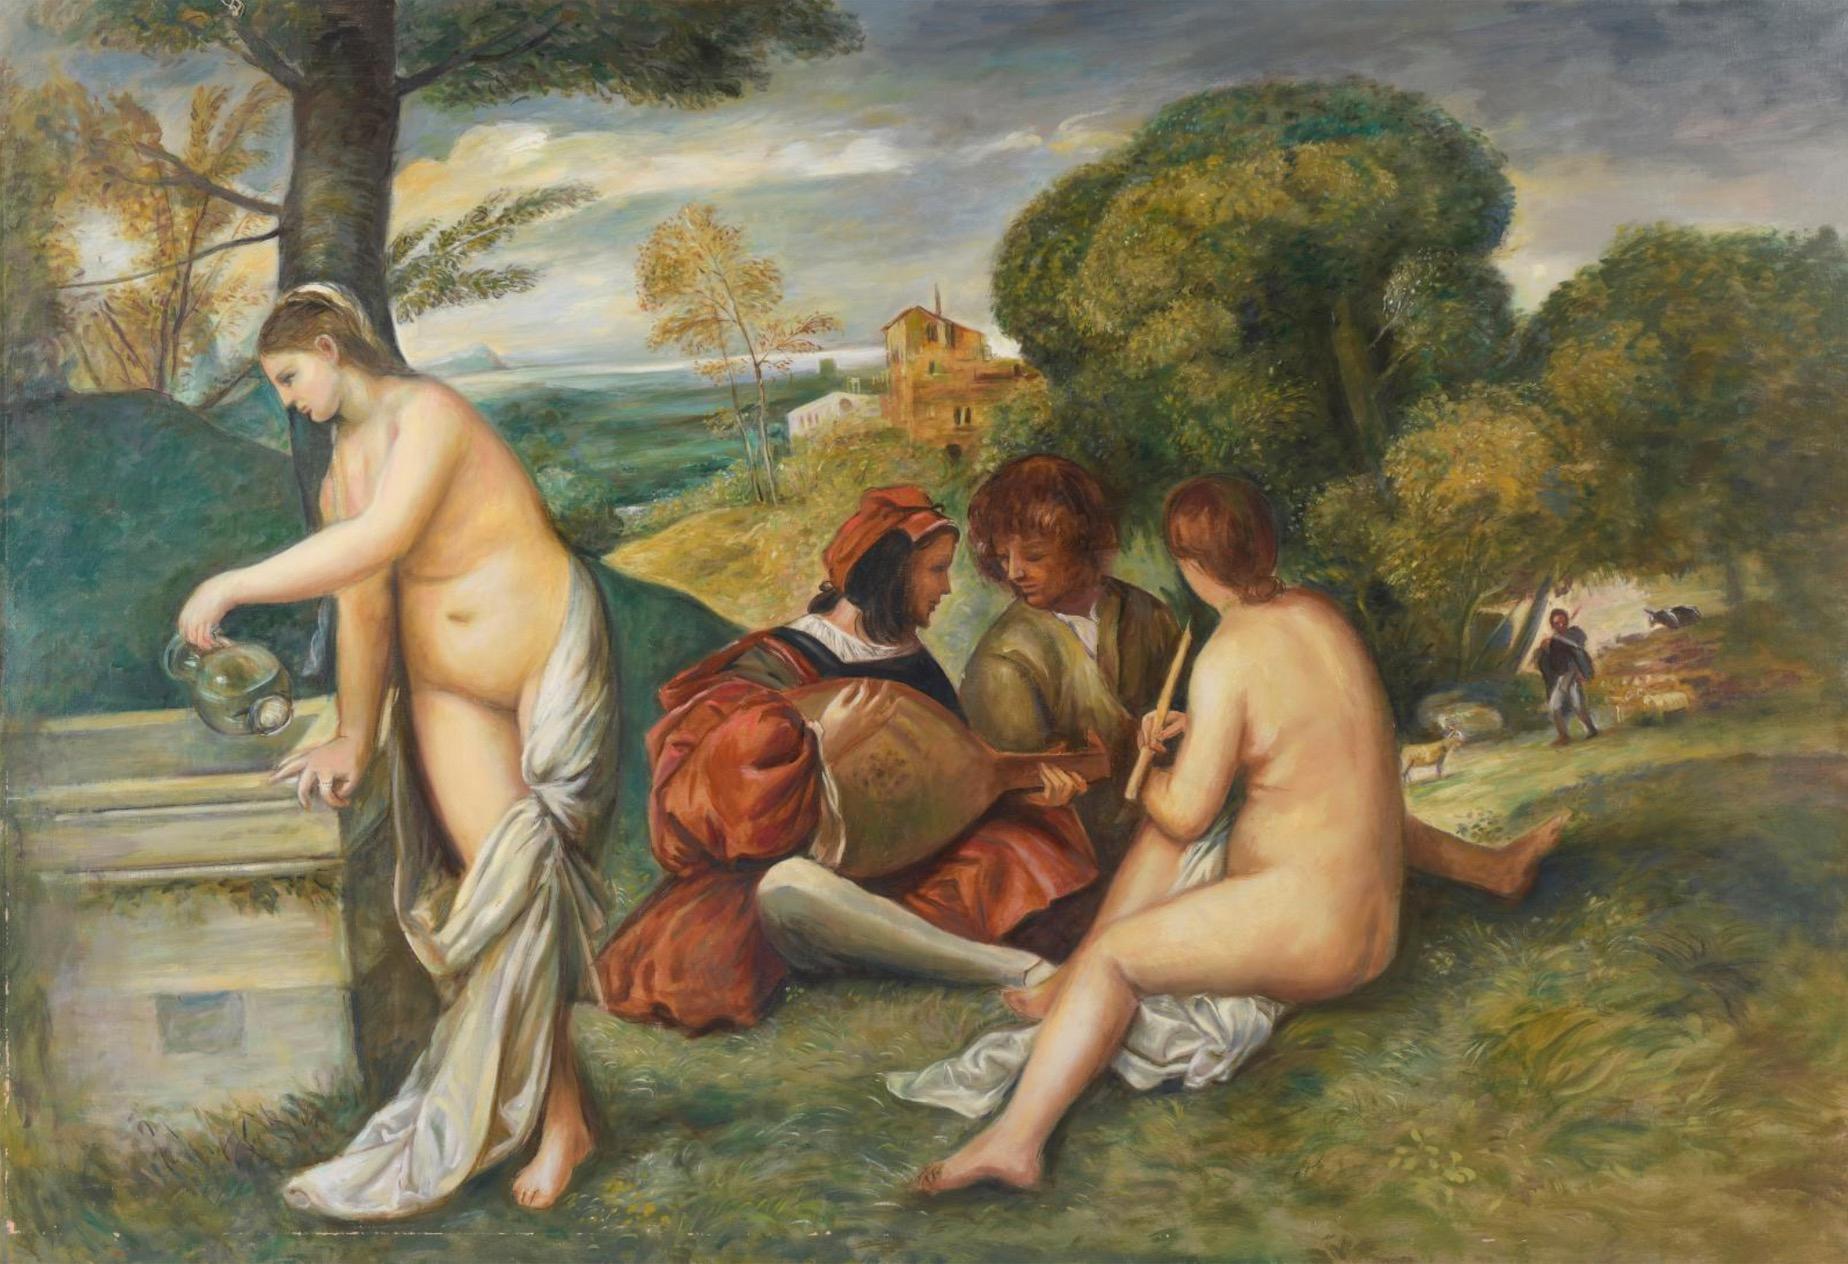 Atelier Dagher after Vecellio (1488/1490 – 1576) Nude Painting - The Country Concert, Large Oil Painting on Canvas by Louvre Copyist